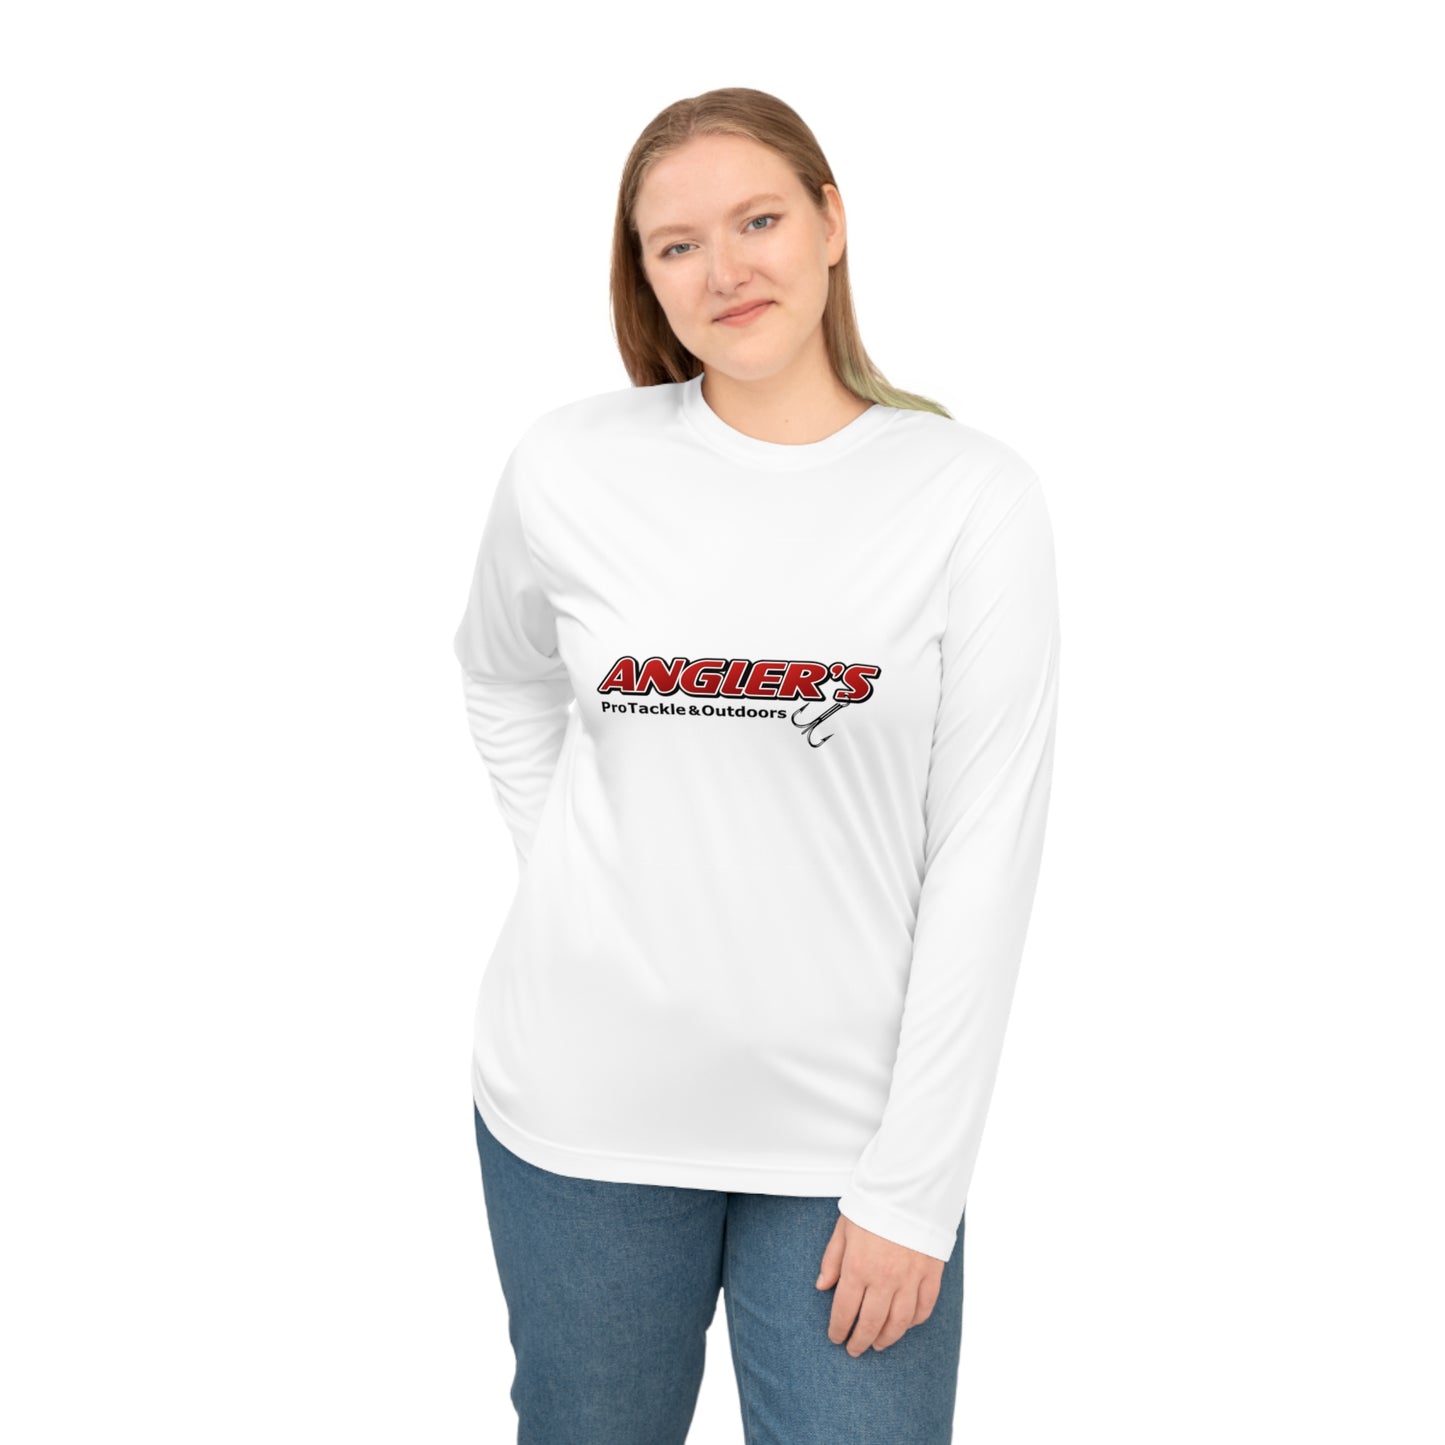 Angler's Pro Tackle & Outdoors Unisex Performance Long Sleeve Shirt